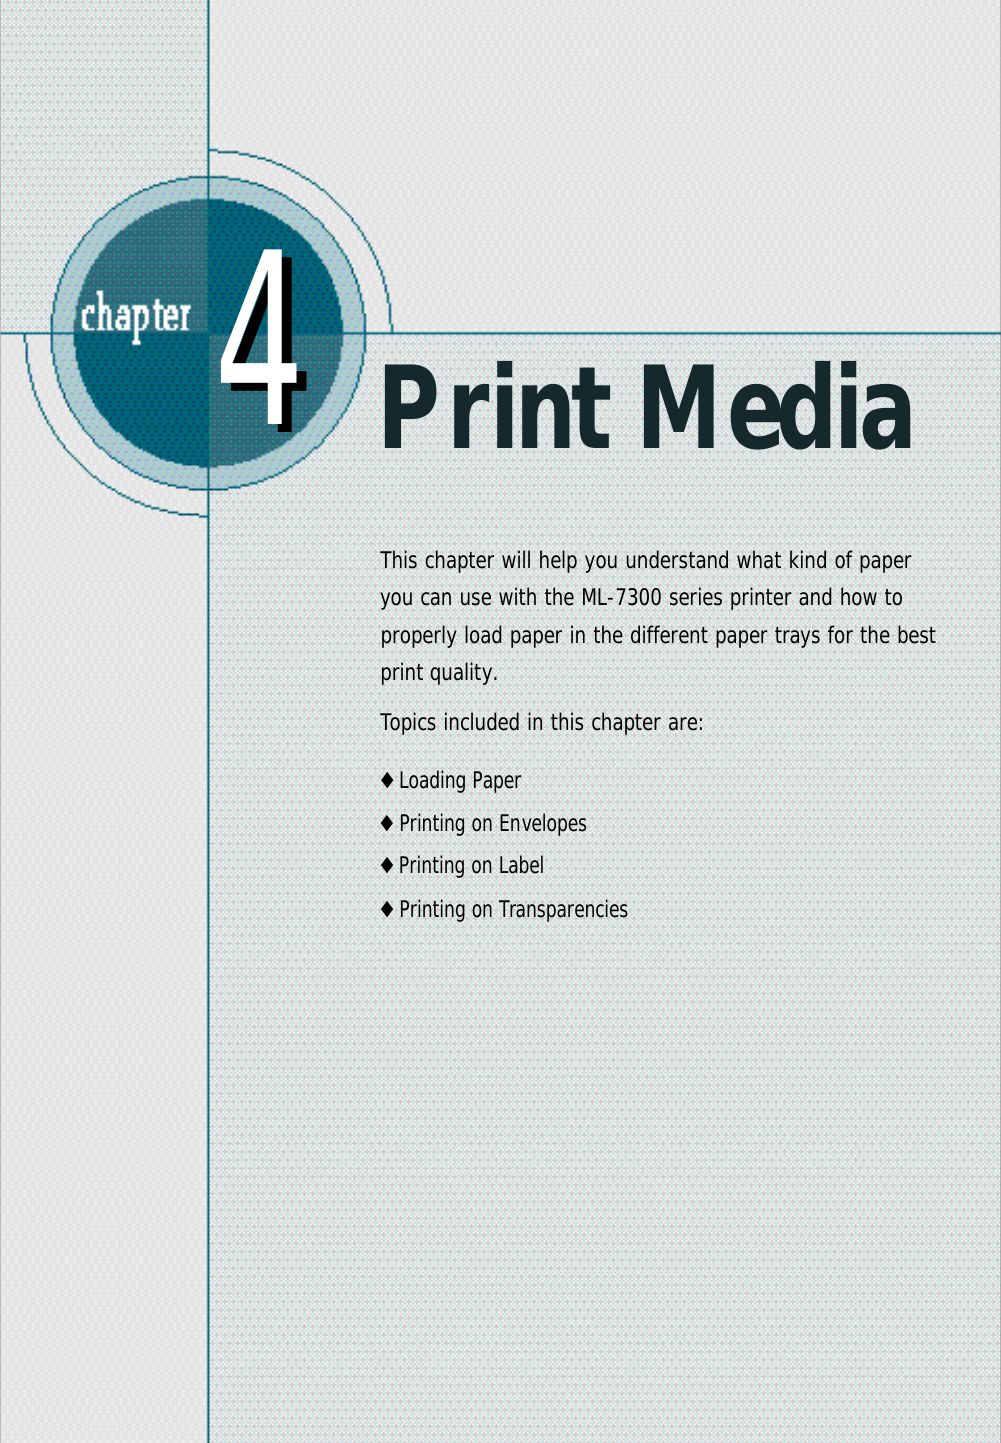 Print MediaThis chapter will help you understand what kind of paperyou can use with the ML-7300 series printer and how toproperly load paper in the different paper trays for the bestprint quality.Topics included in this chapter are:◆Loading Paper◆Printing on Envelopes◆Printing on Label◆Printing on Transparencies44